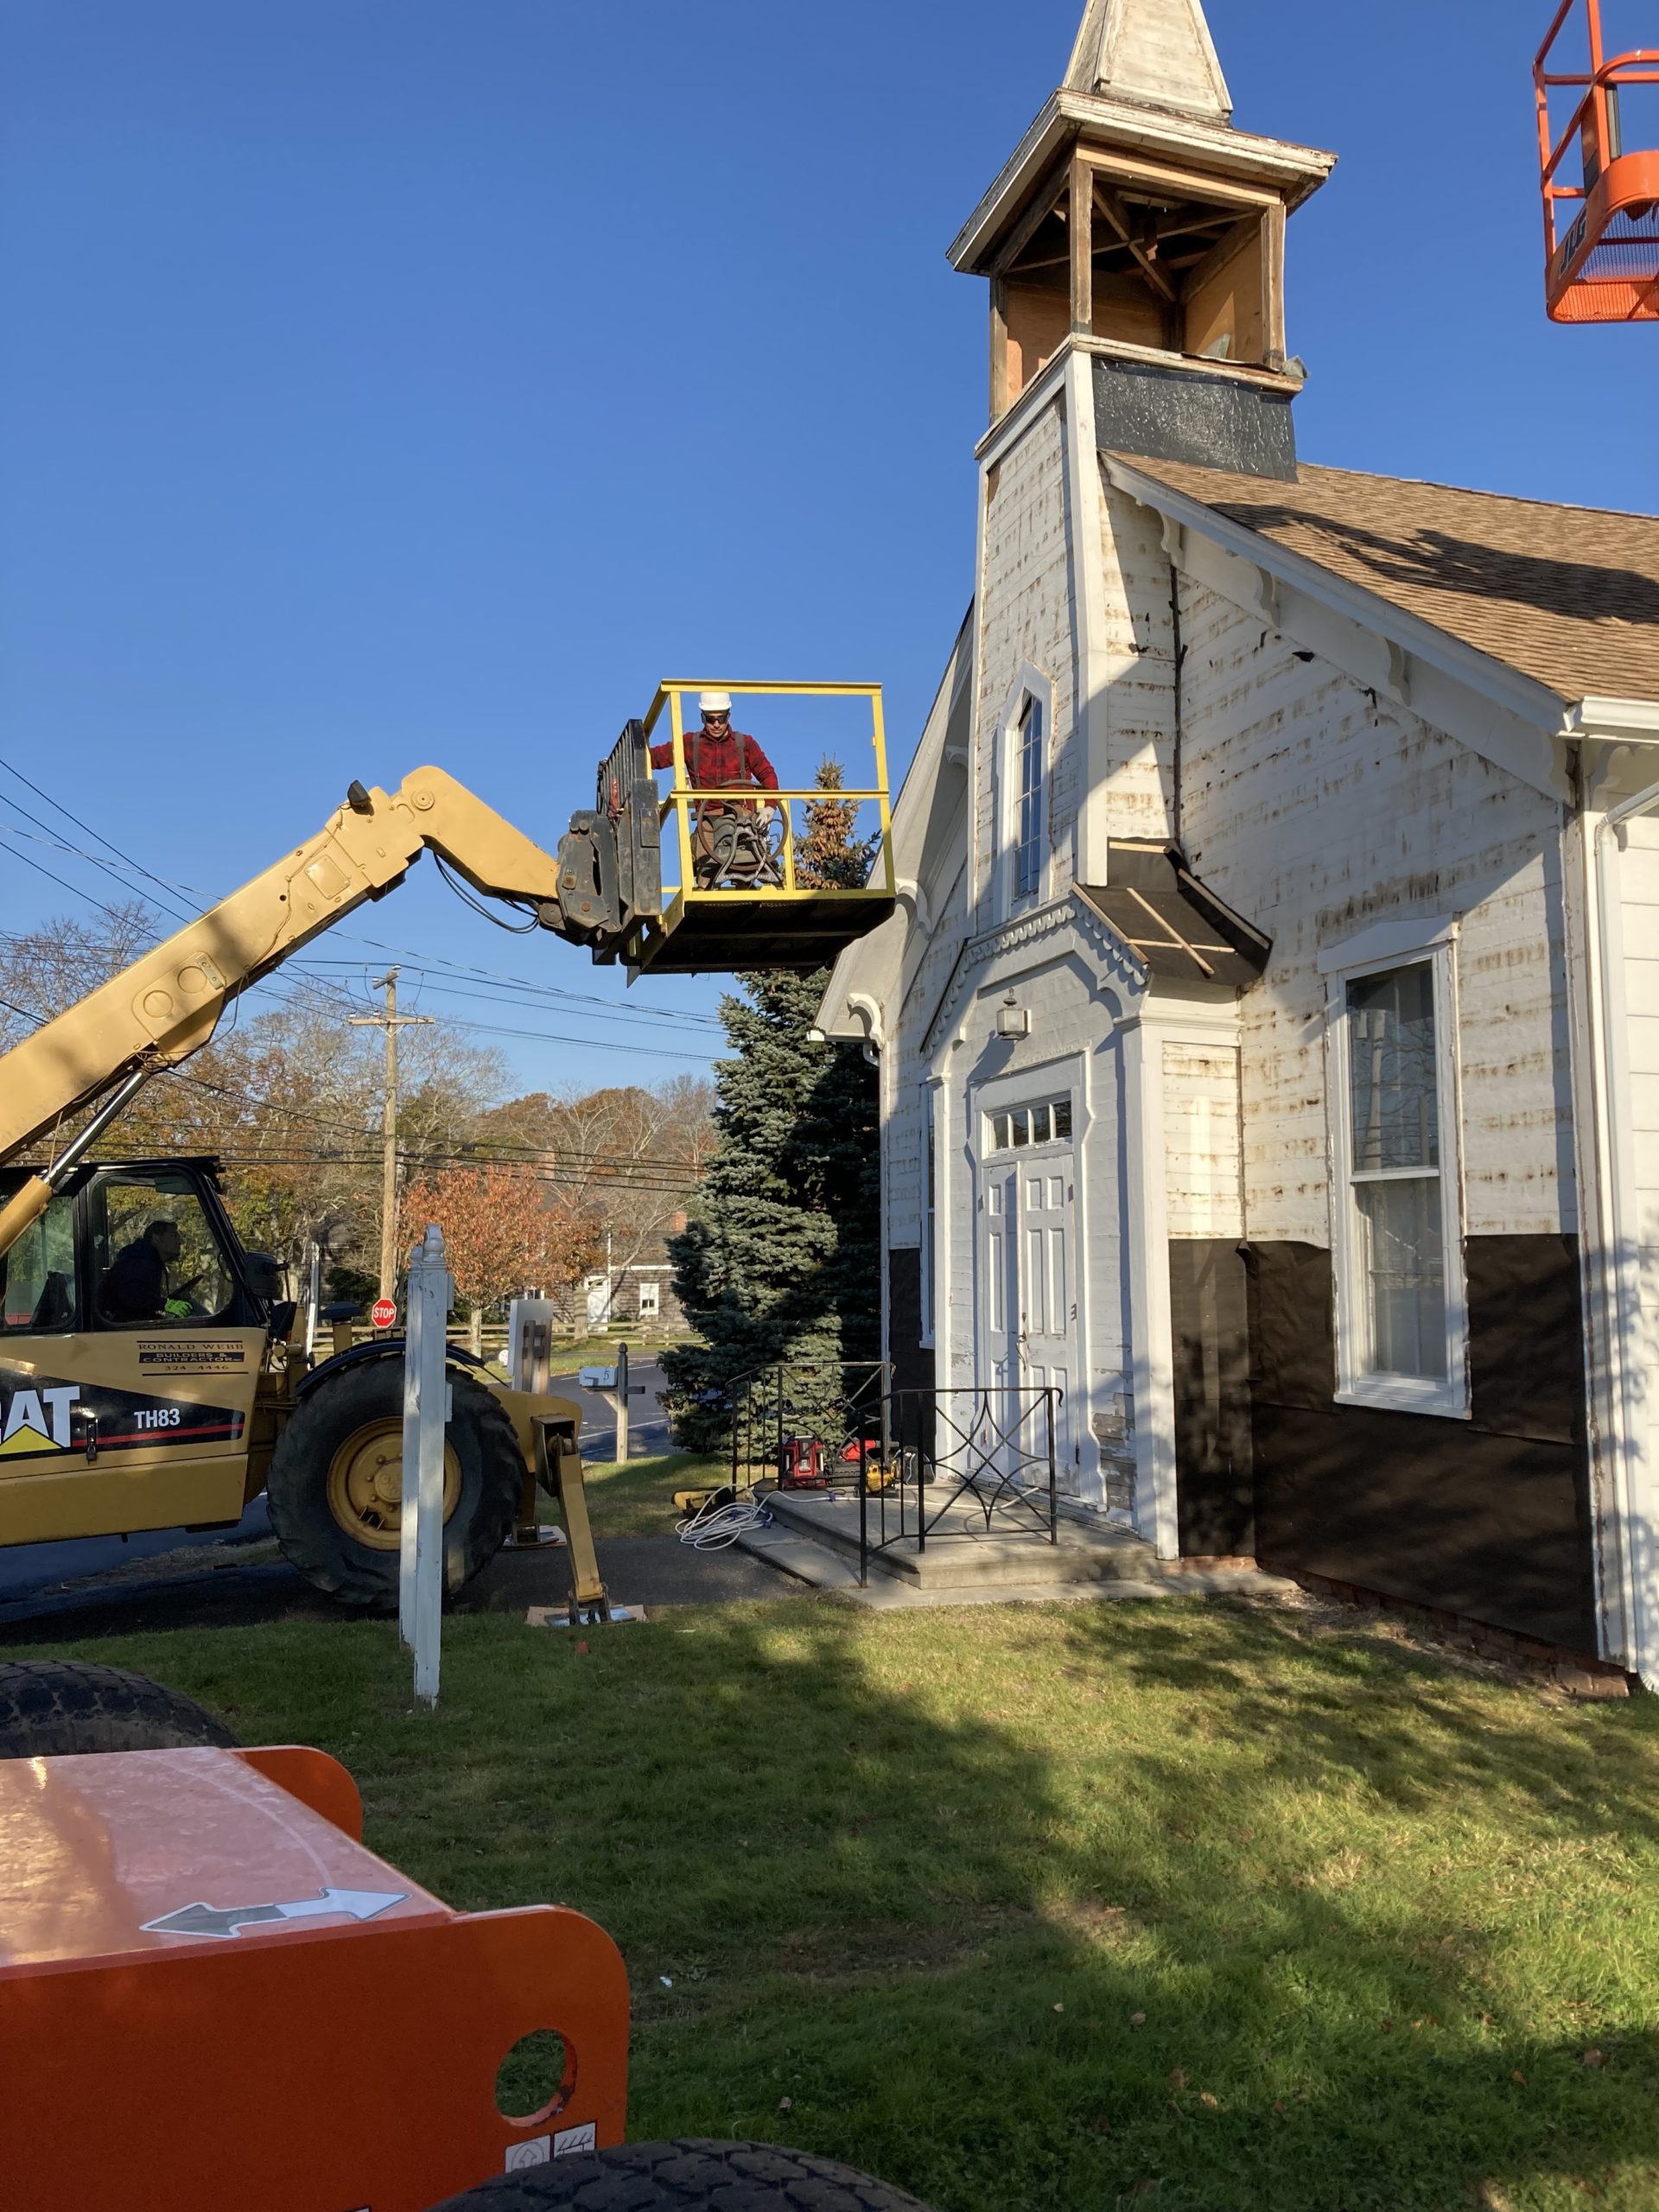 The bell has been removed and renovations started on the Springs Presbyterian Church steeple.